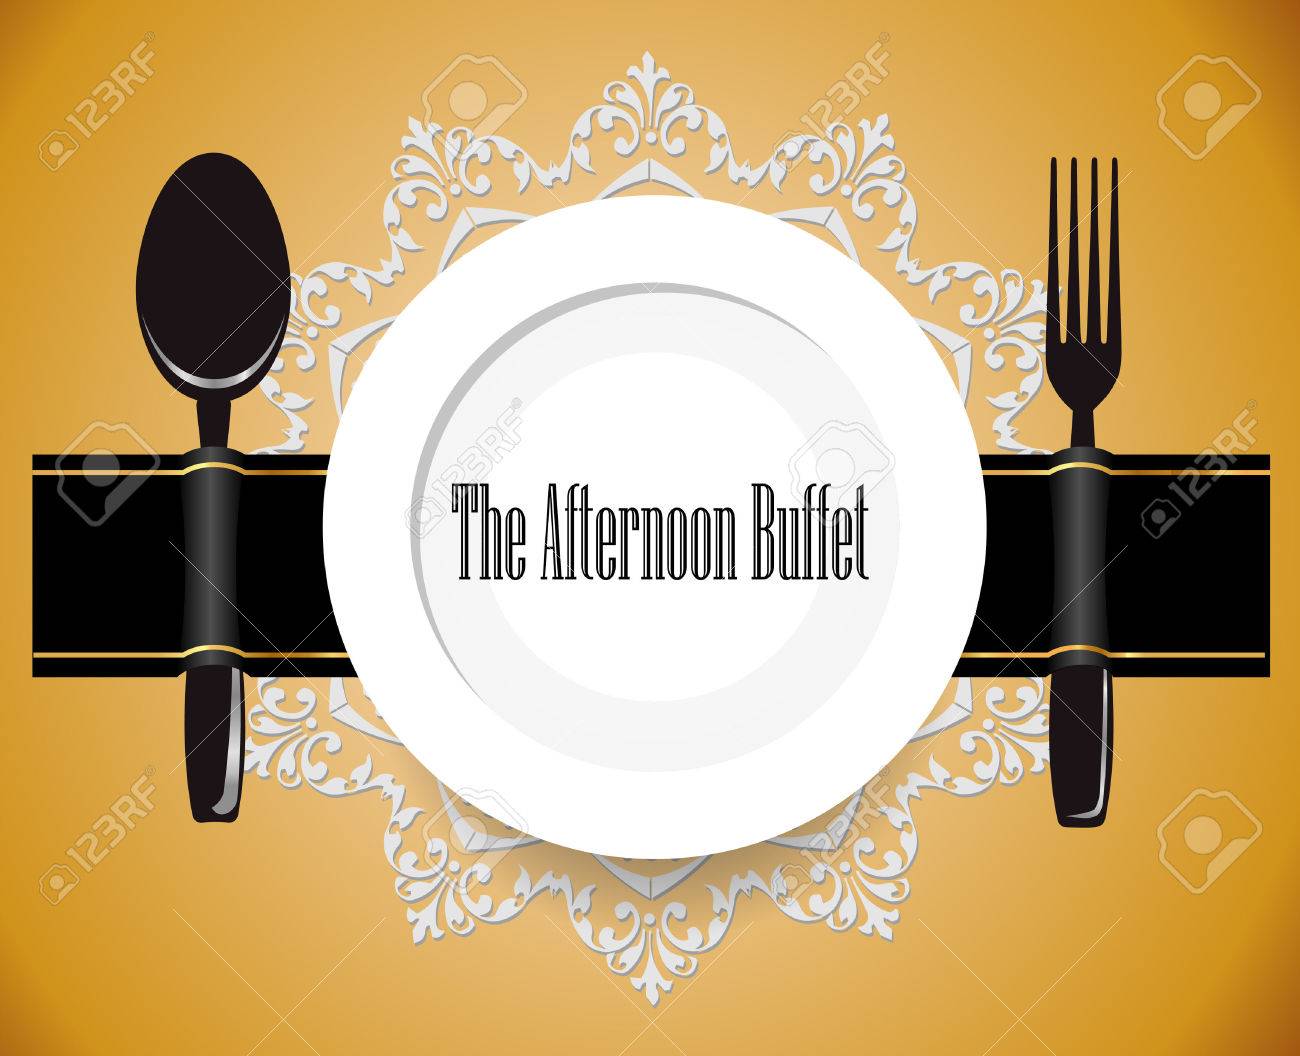 36710180-the-afternoon-buffet-lunch-all-you-can-eat-buffet-sign-vector-eps10